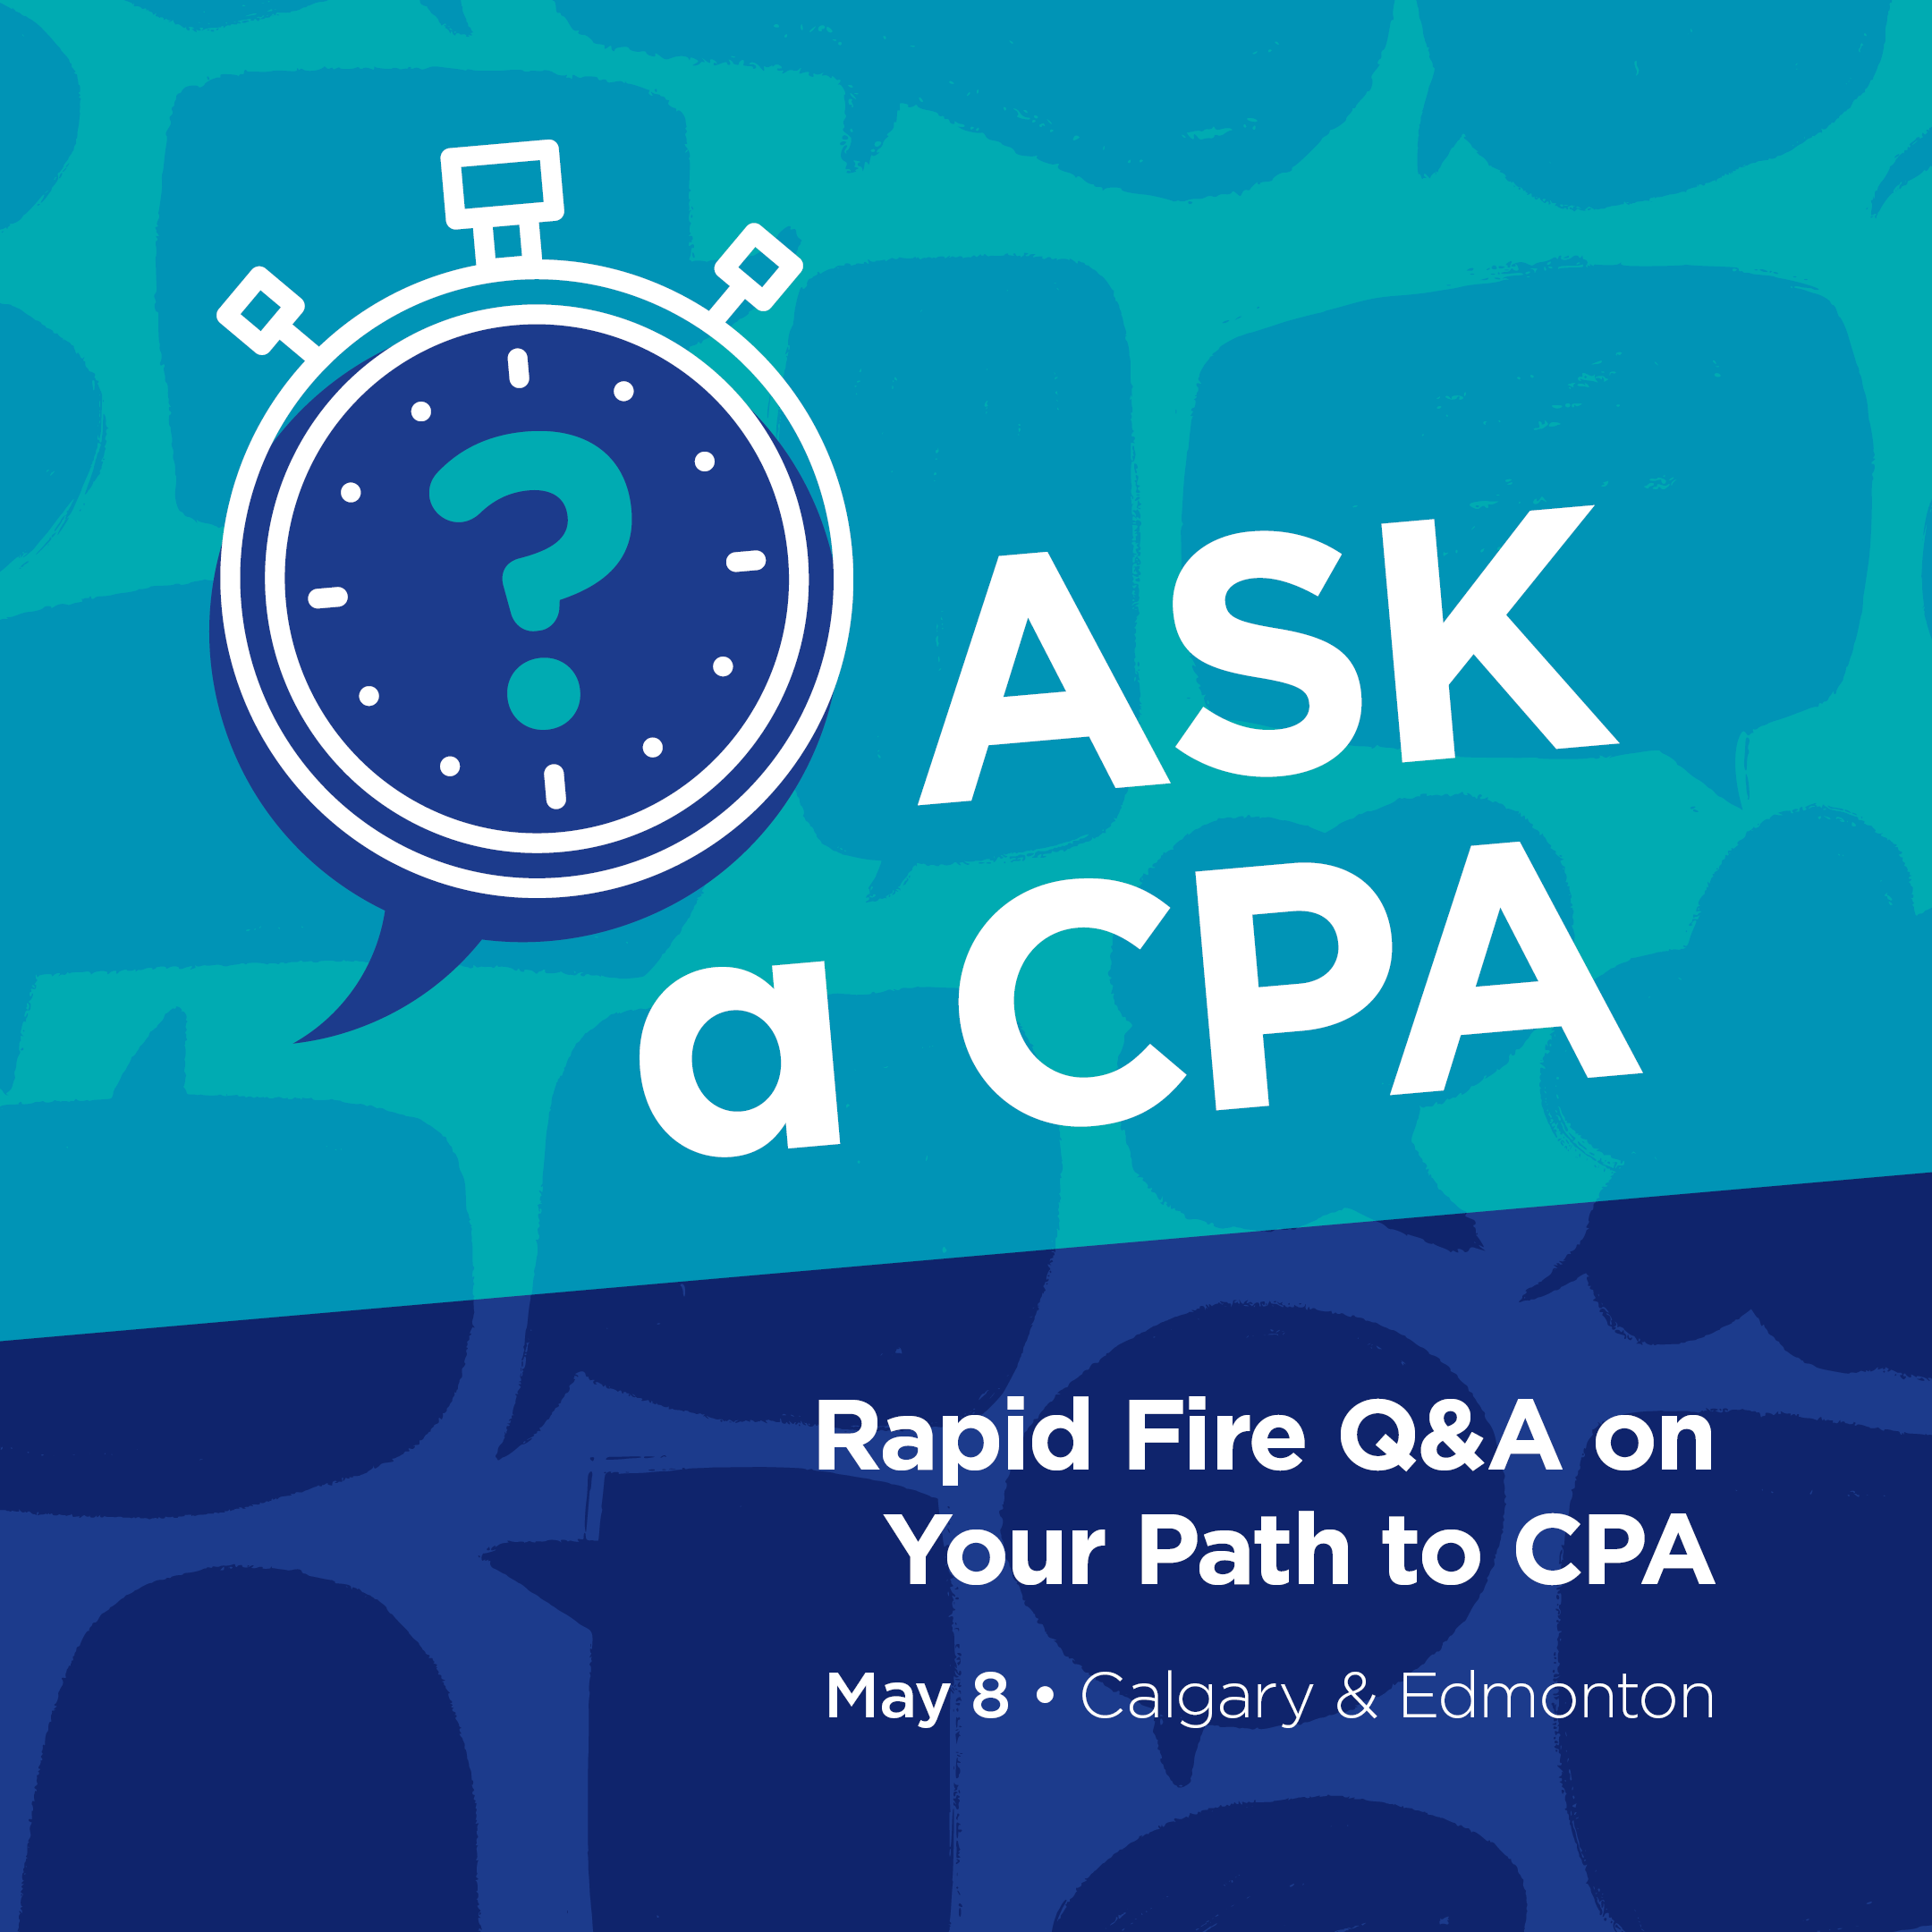 The image appears to be a banner with a stylized design including a stopwatch with a question mark on its face. The text reads "ASK a CPA" with the phrase "Rapid Fire Q&A on Your Path to CPA" beneath it. The color scheme includes various shades of blue with white and green accents. The design suggests that this may be for a session where questions are quickly answered, possibly aimed at individuals interested in becoming Certified Public Accountants (CPAs).